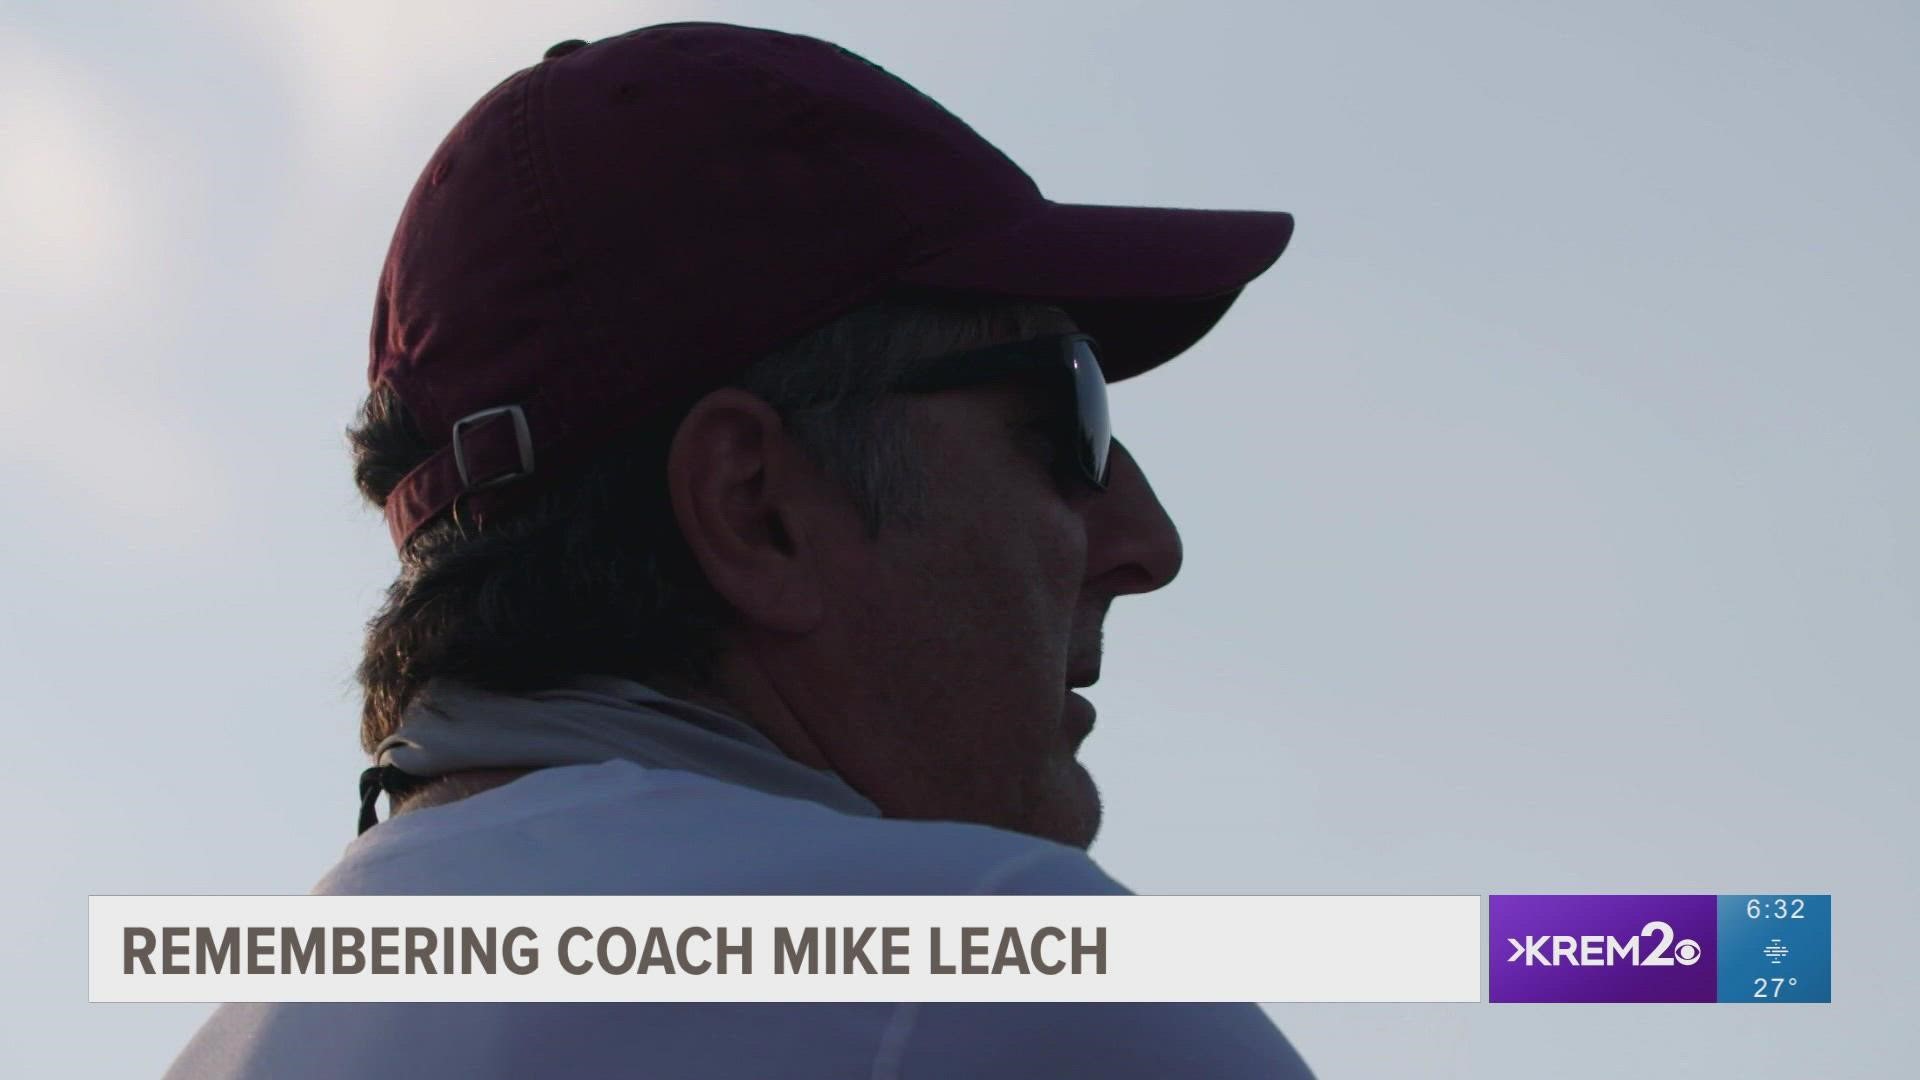 KREM 2 takes a look back at Mike Leach's life, career and legacy in wake of his sudden passing.